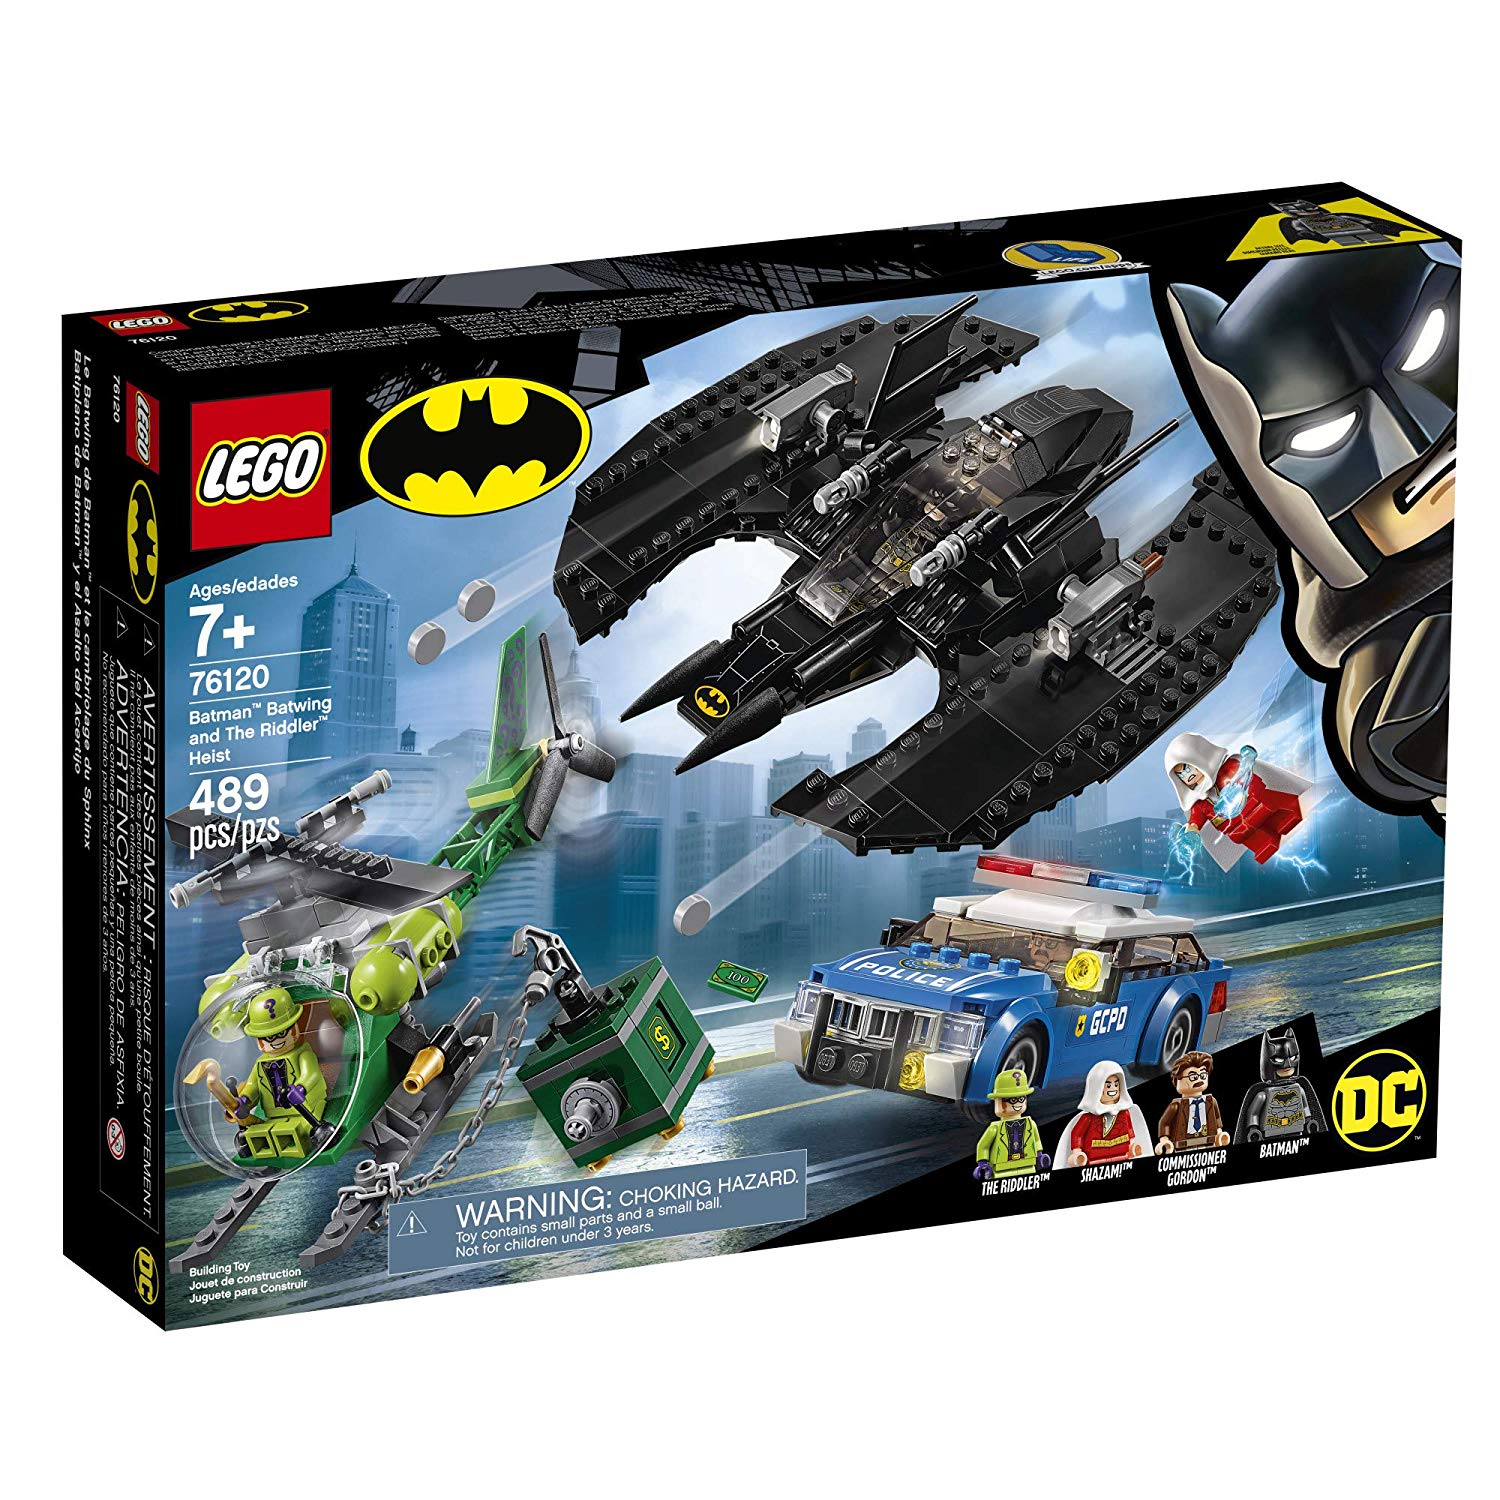 LEGO Batman Batwing and The Riddler Heist (76120) Amazon Sale - August 2019  - The Brick Fan